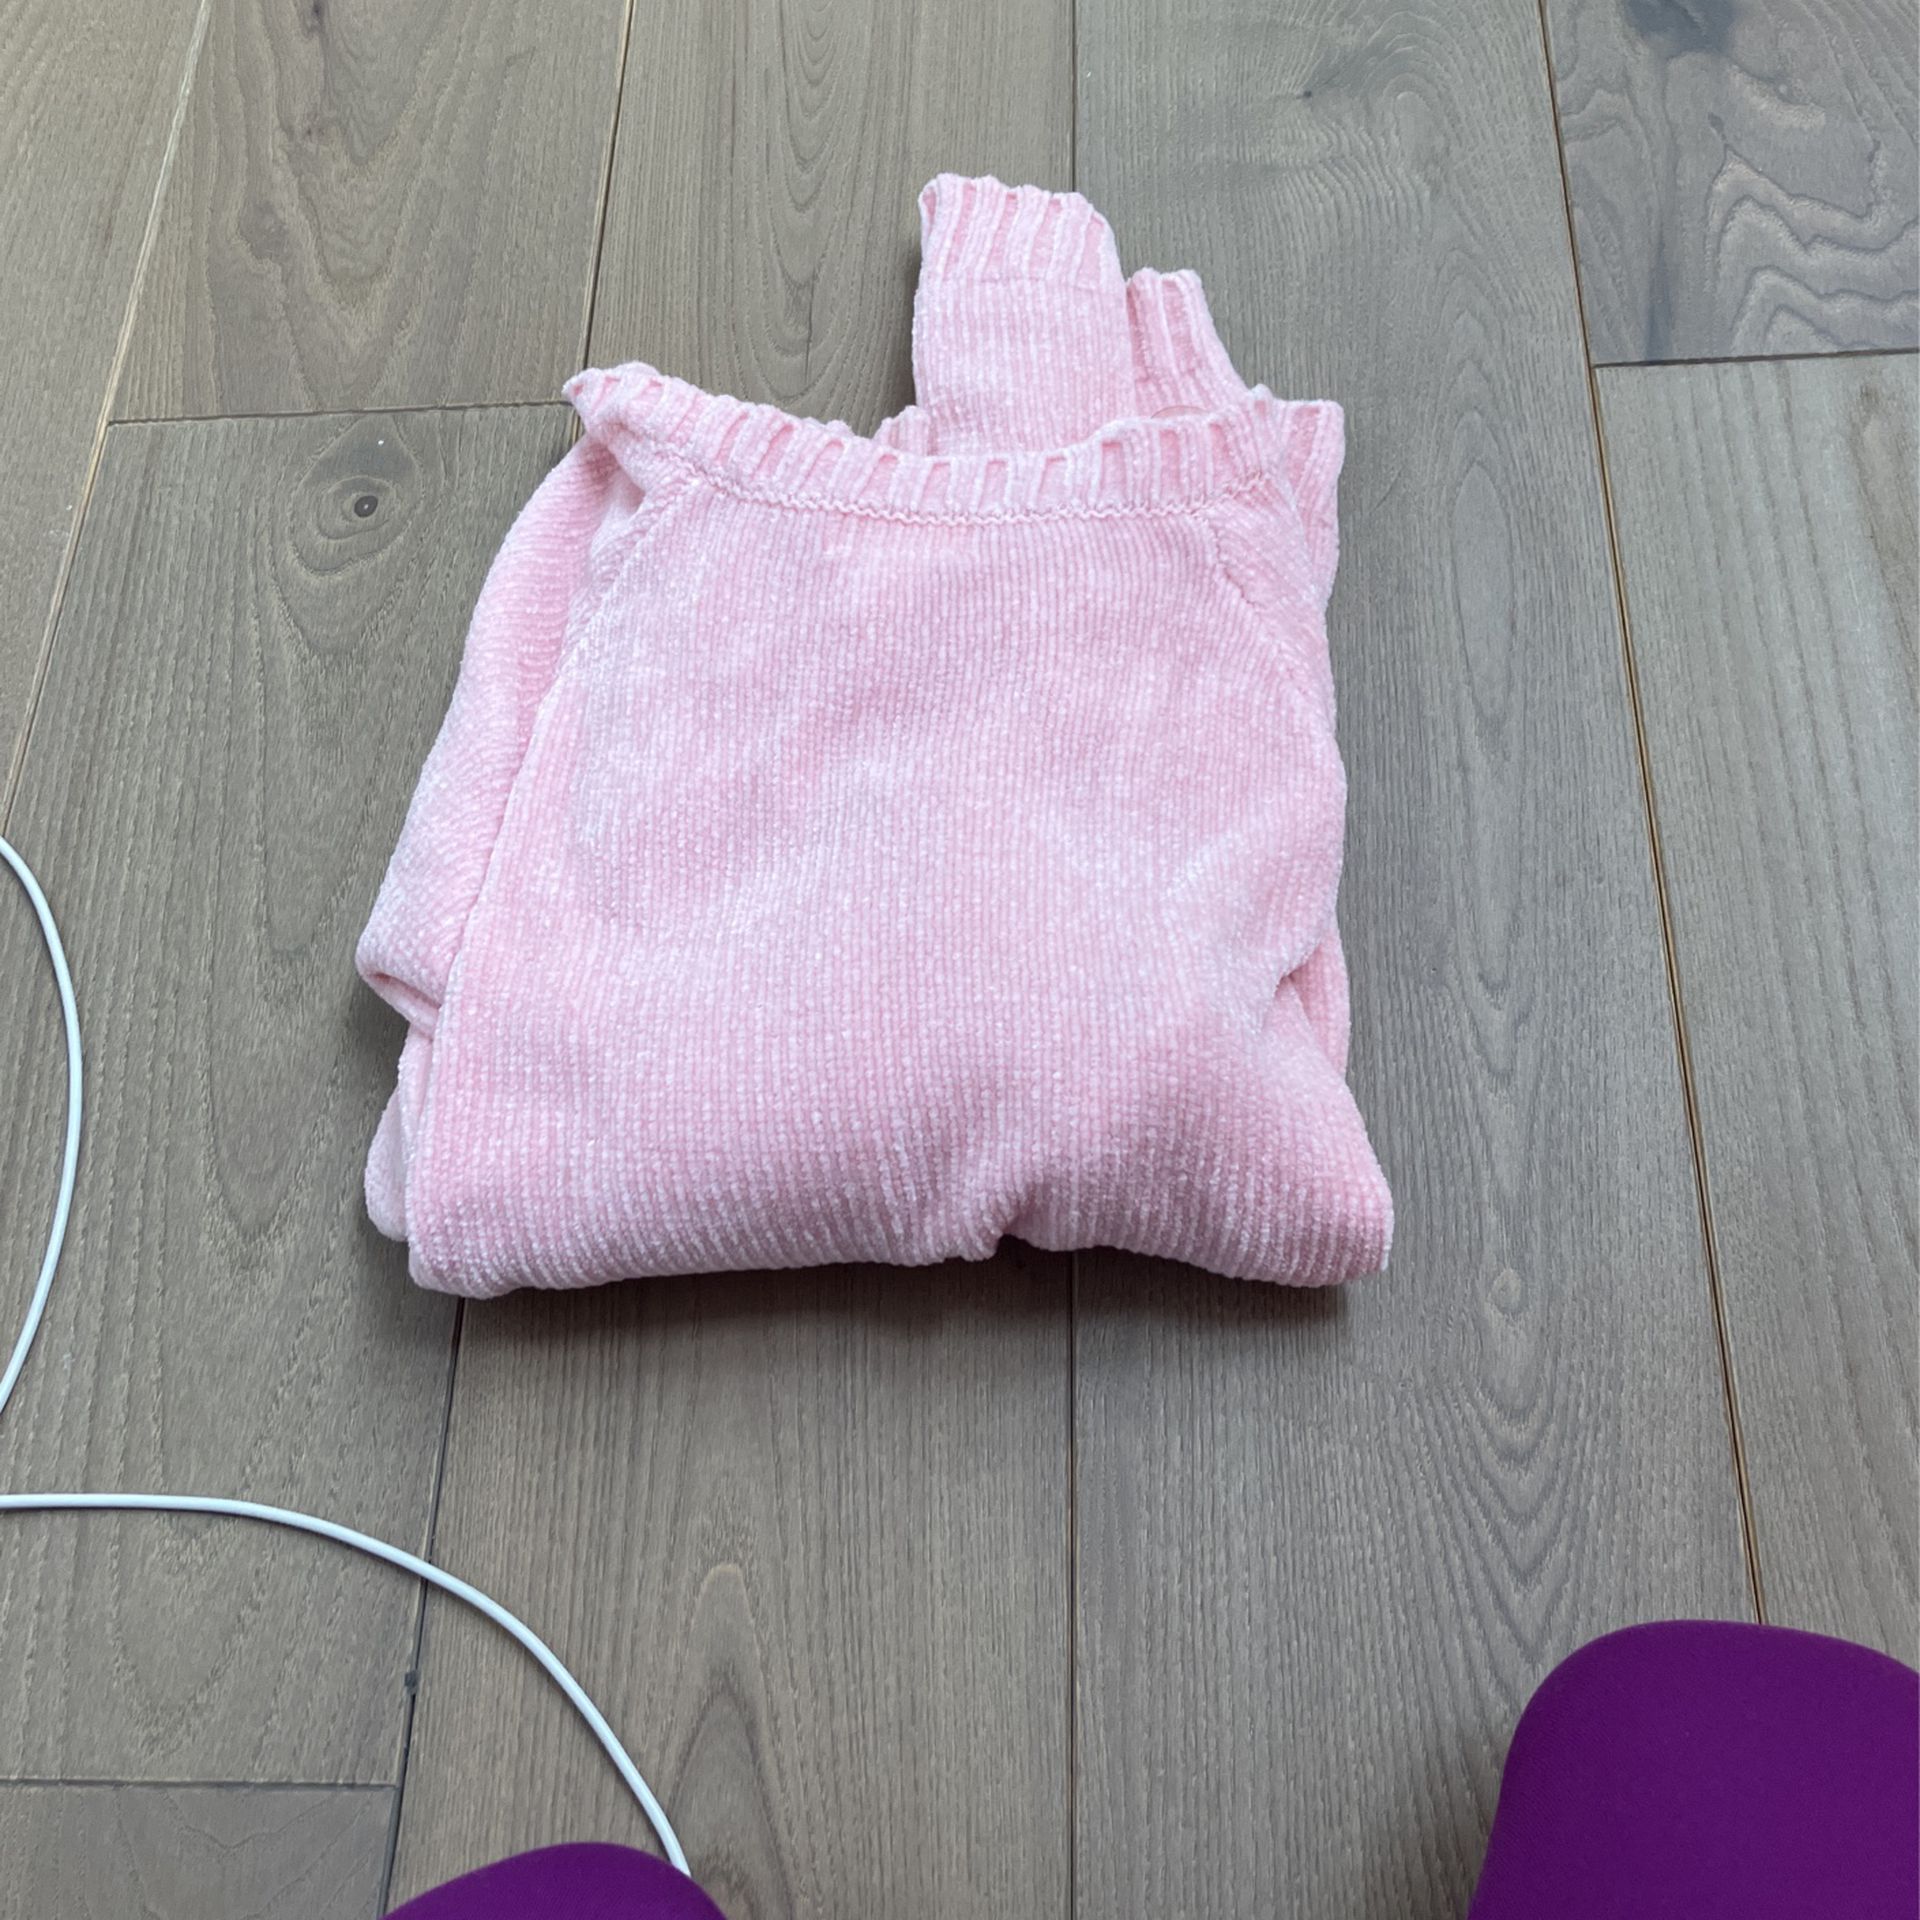 Pink Cardigan For Girls. Brand: Cat& Jack. Size M. Ages 7/8